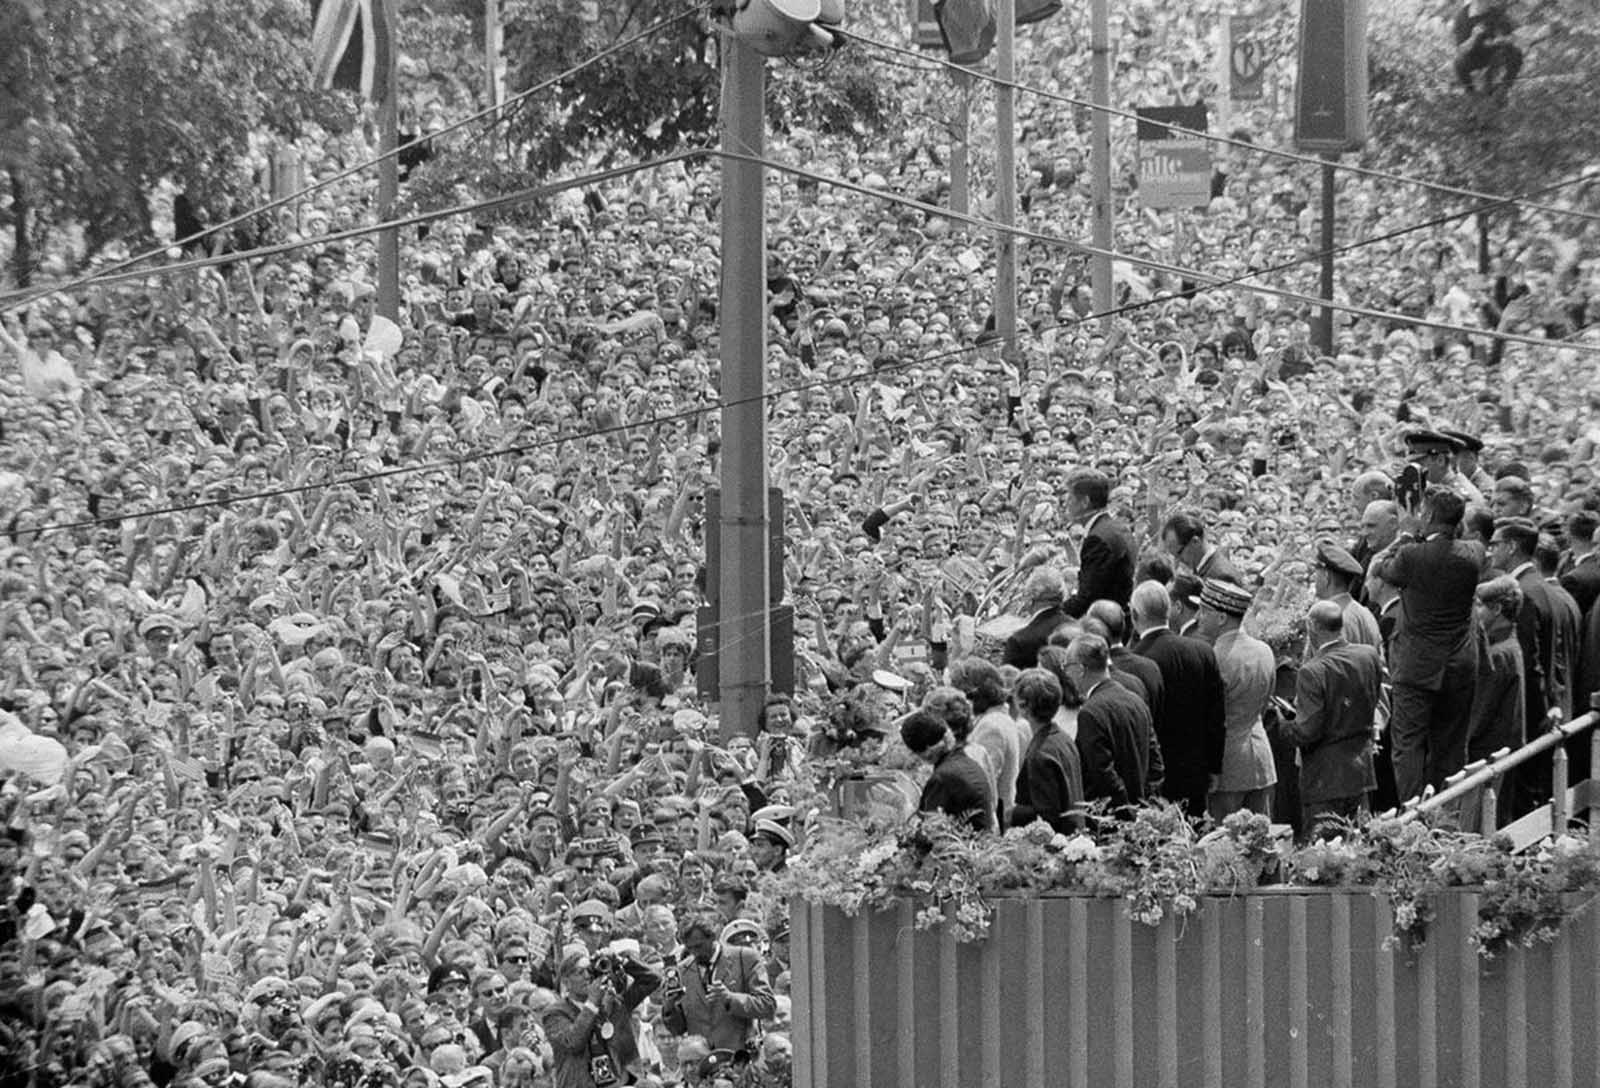 A cheering crowd, estimated by police at more than a quarter of a million, fills the area beneath the podium at West Berlin's City Hall, where U.S. President John F. Kennedy stood. His address to the City Hall crowd was one of the highlights of his June 26, 1963 visit to West Berlin, where he received one of the greatest receptions of his career.